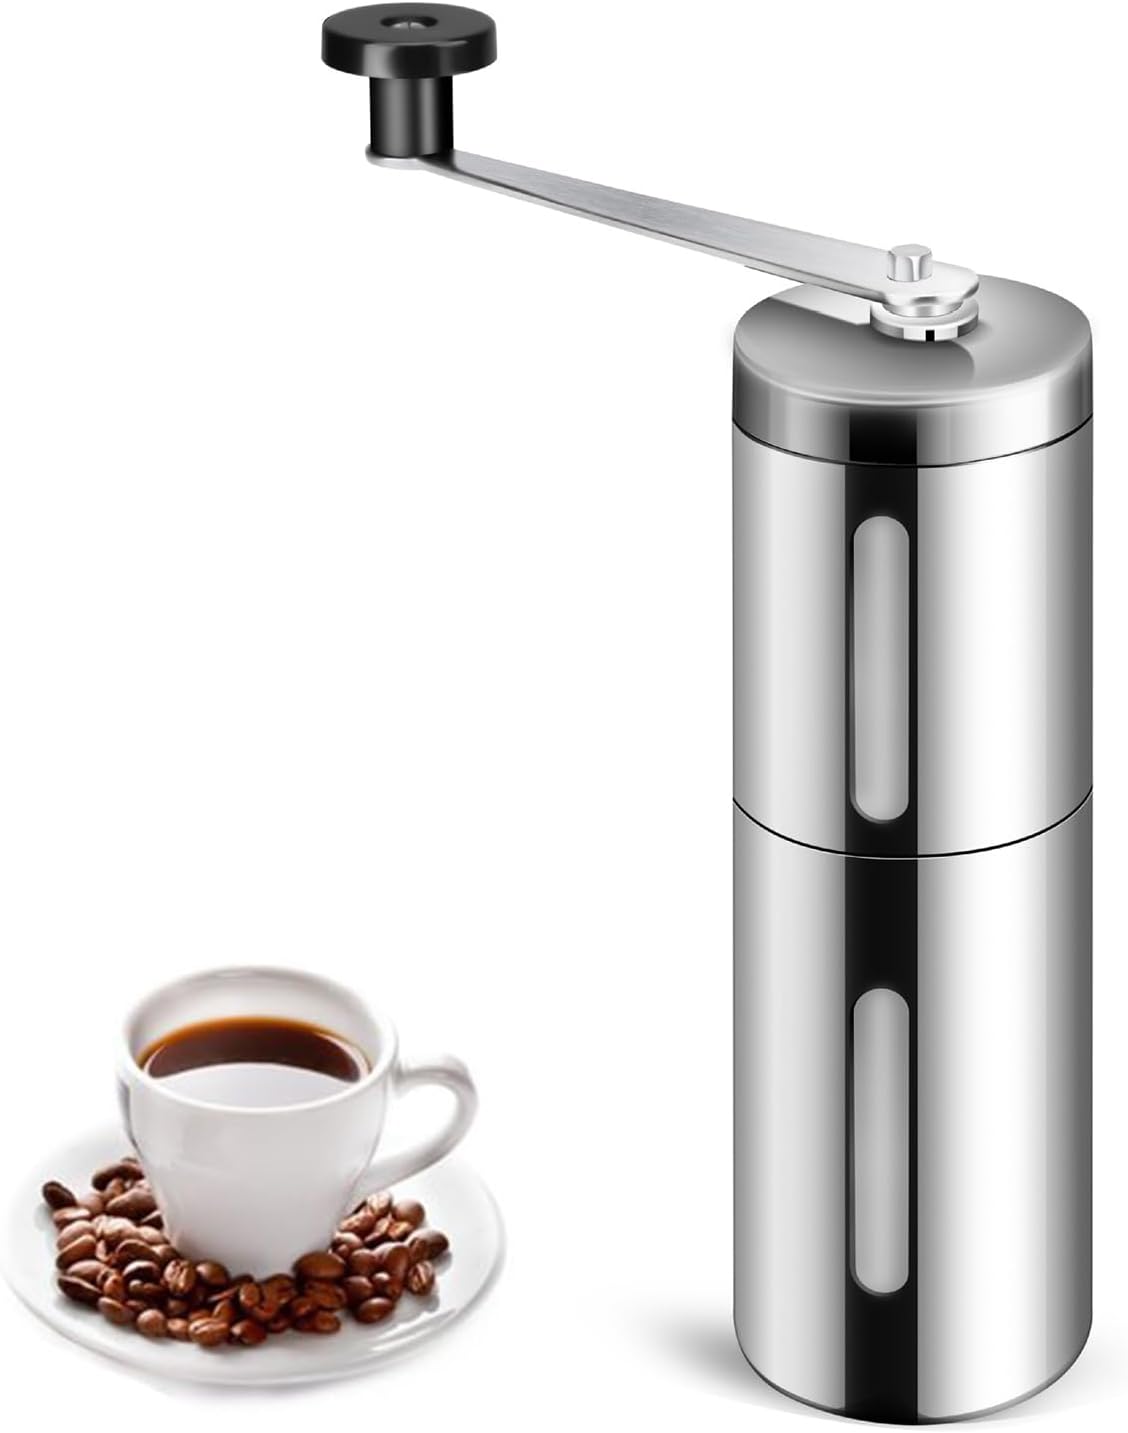 Stainless Steel Hand Mill, Manual Coffee Grinder, Espresso Grinder, Stainless Steel Hand Coffee Grinder, Precise Grinding Adjust, for Home and Travel, Kitchen Accessories